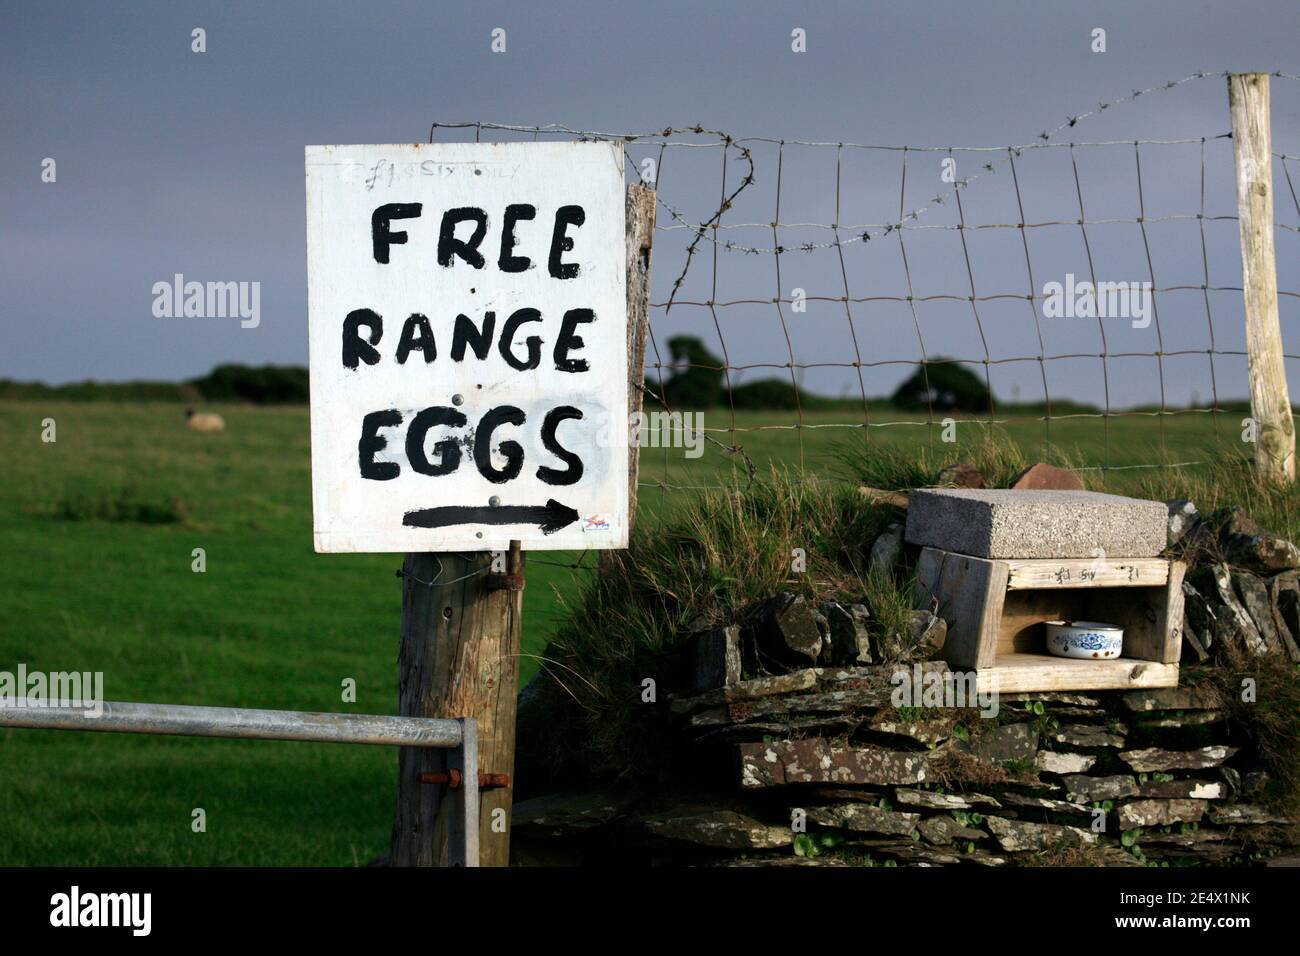 Free Range Eggs for sale at side of rural road in Devon. England. Free range eggs cannot be sold in UK from 21st March 2022 due to bird flu. Stock Photo